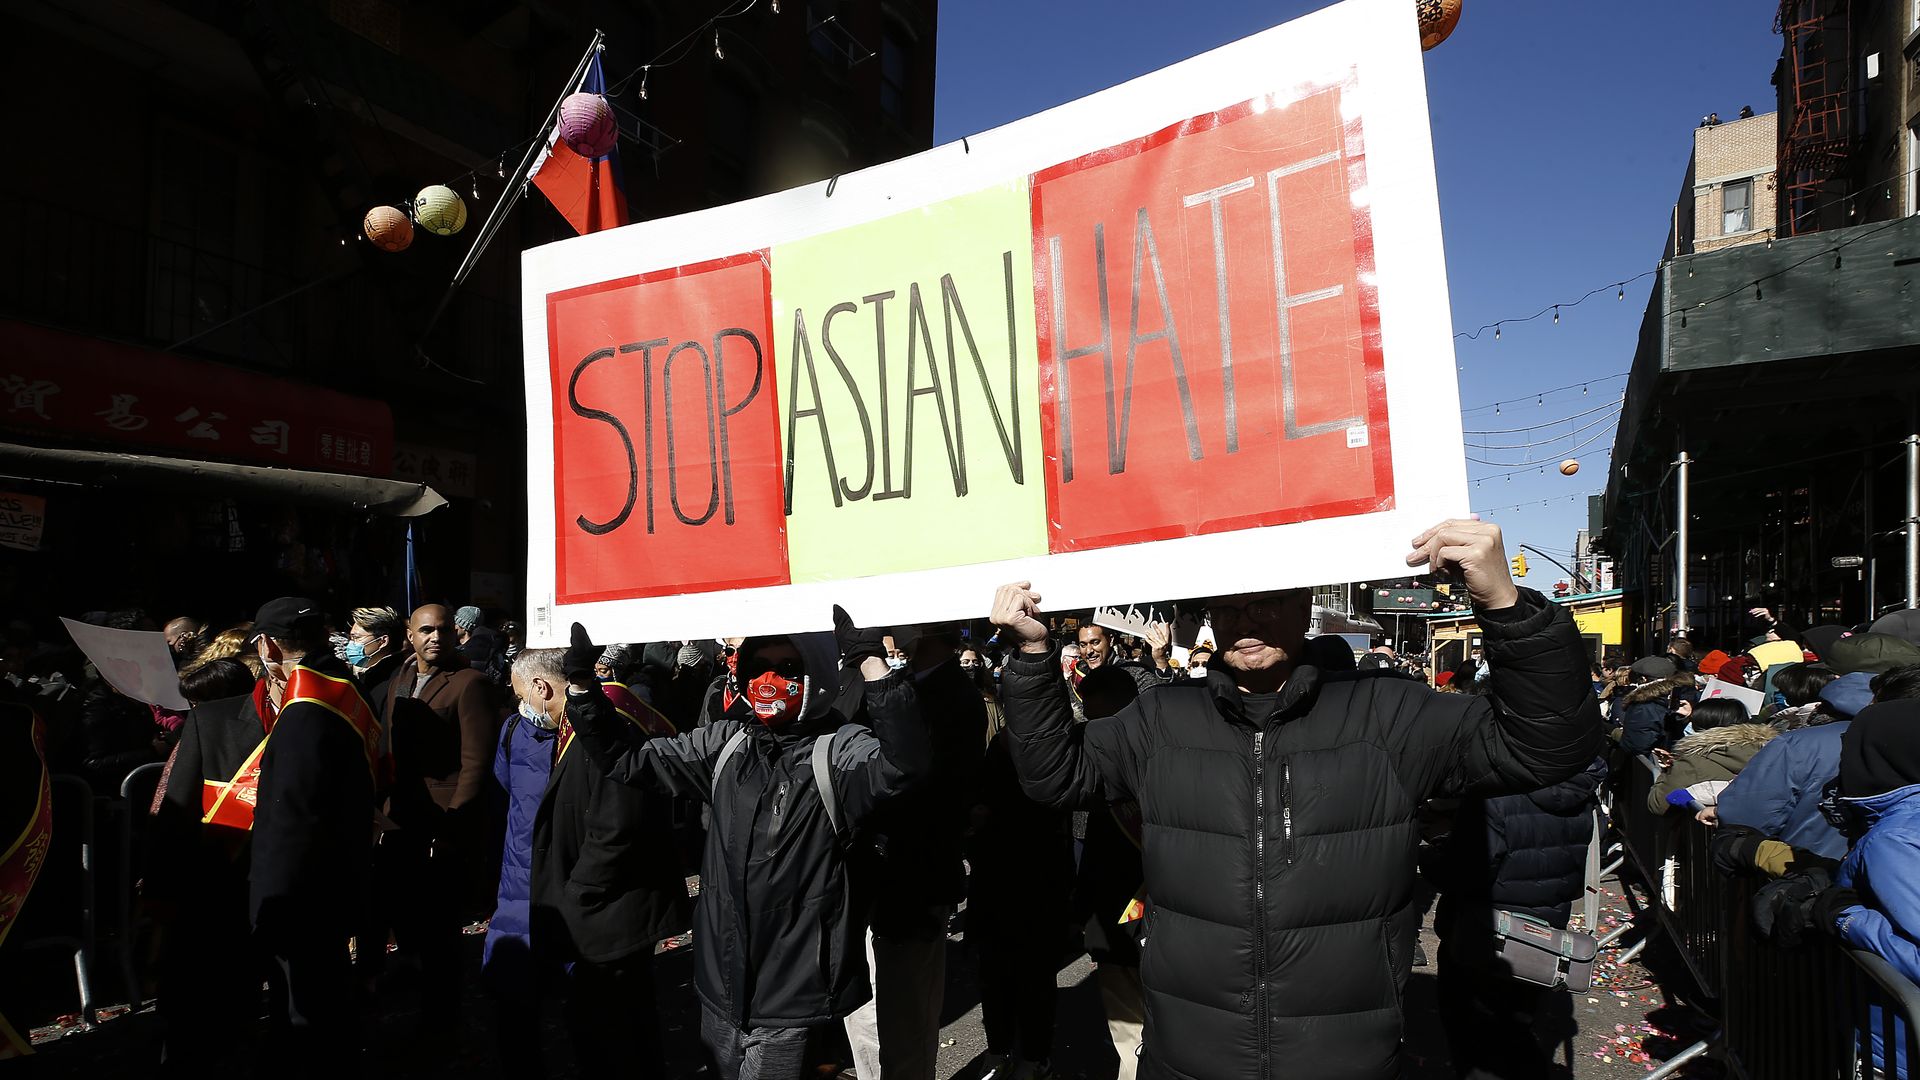 Photo of people holding a large red and yellow sign that says "Stop Asian Hate" in a parade in Chinatown